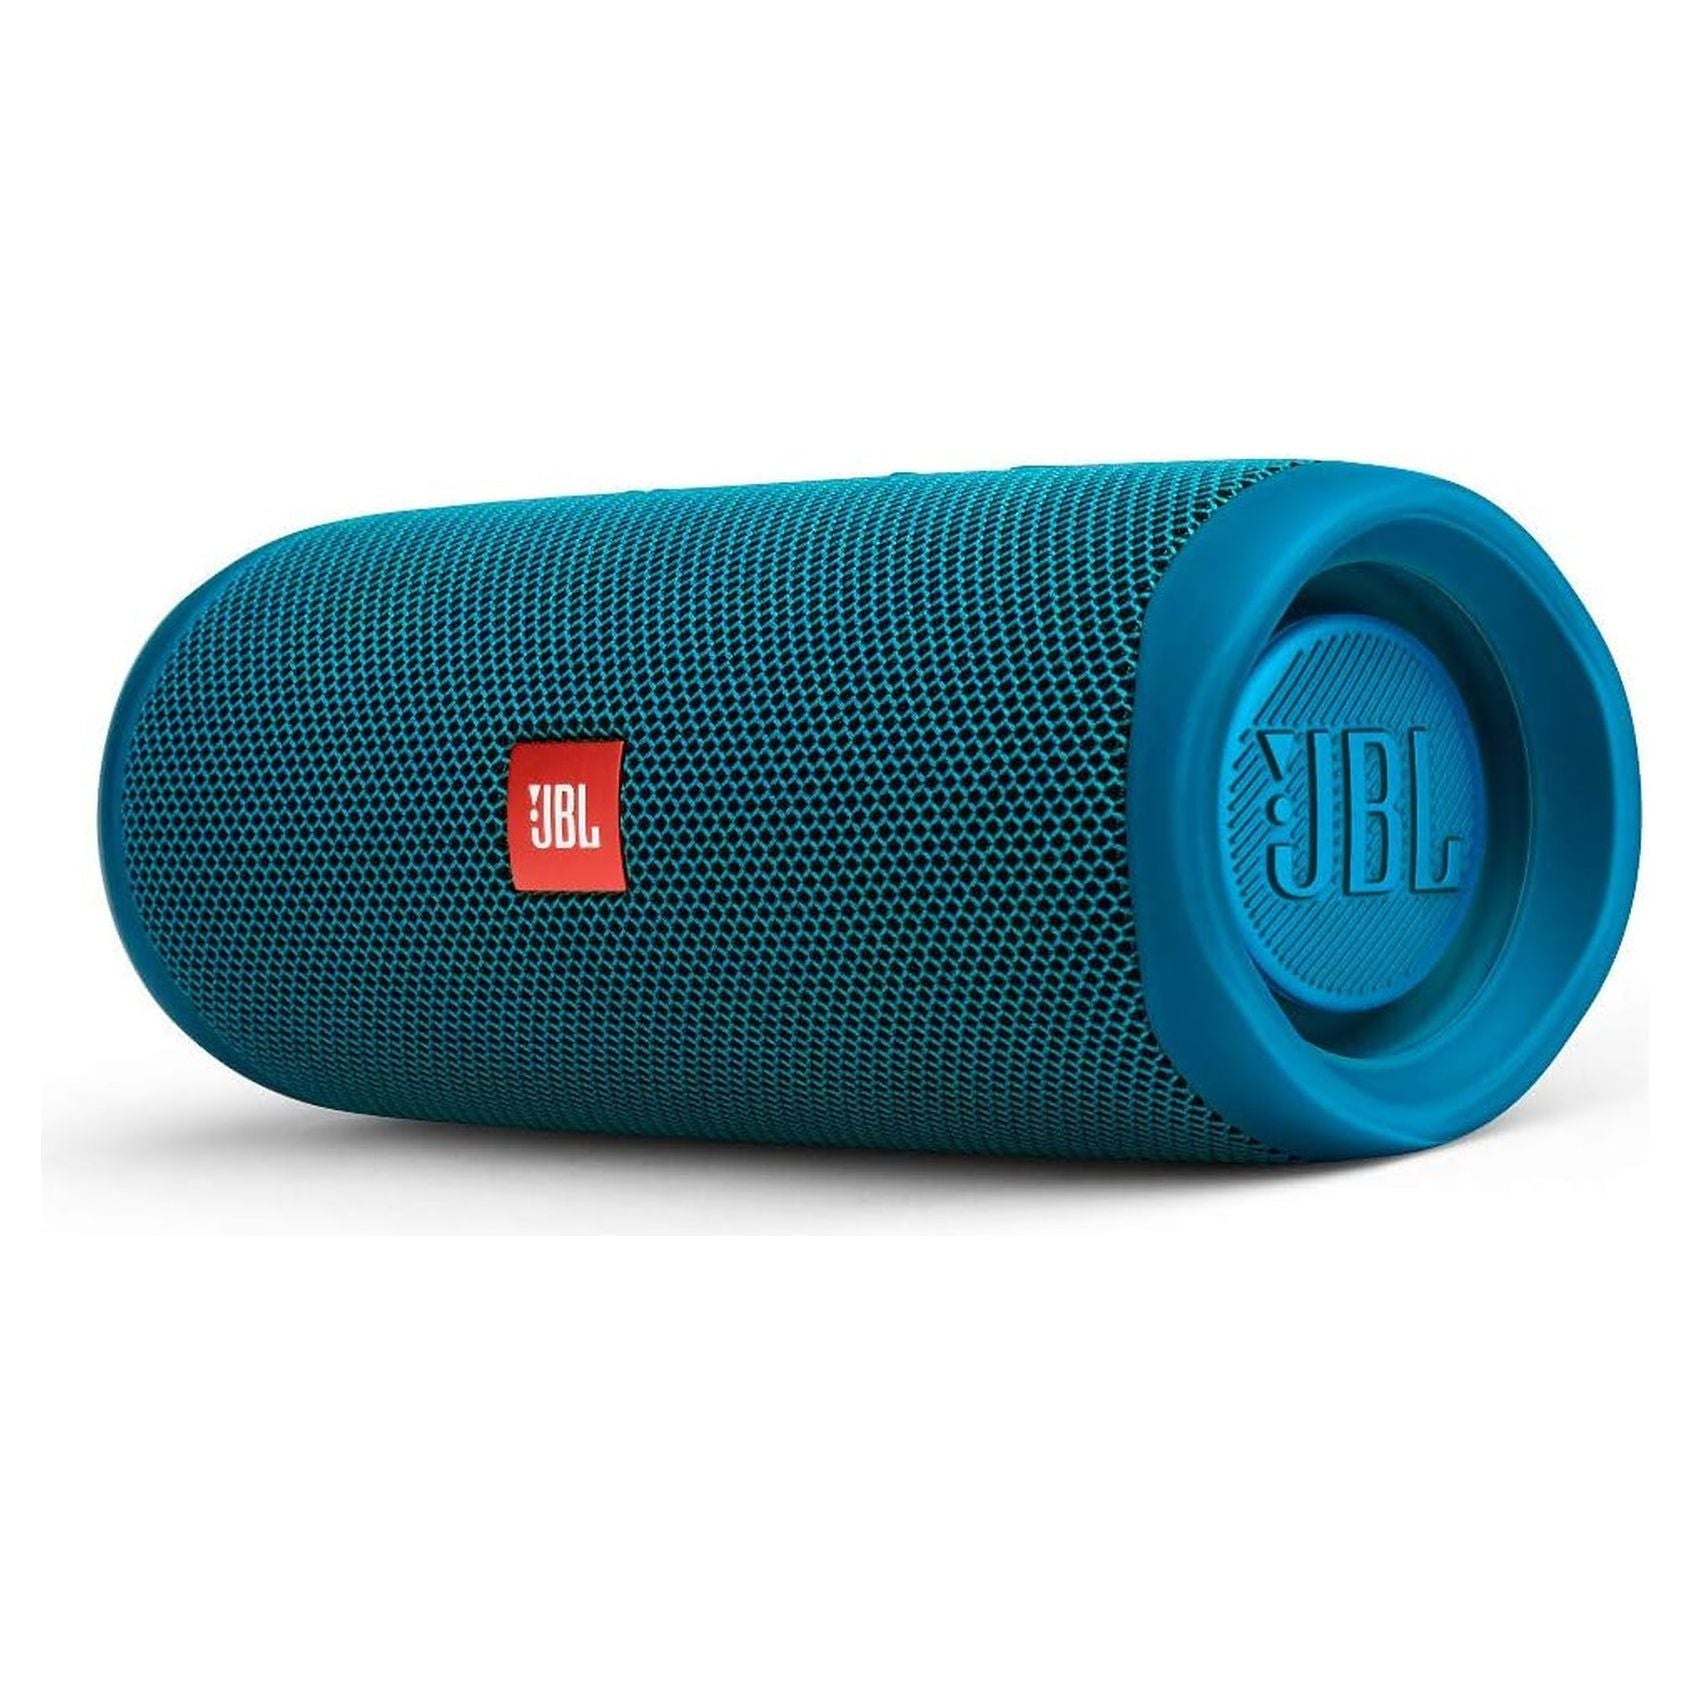 FLIP 5 - Waterproof Portable Bluetooth Speaker Made from 100% Recycled Plastic - Blue